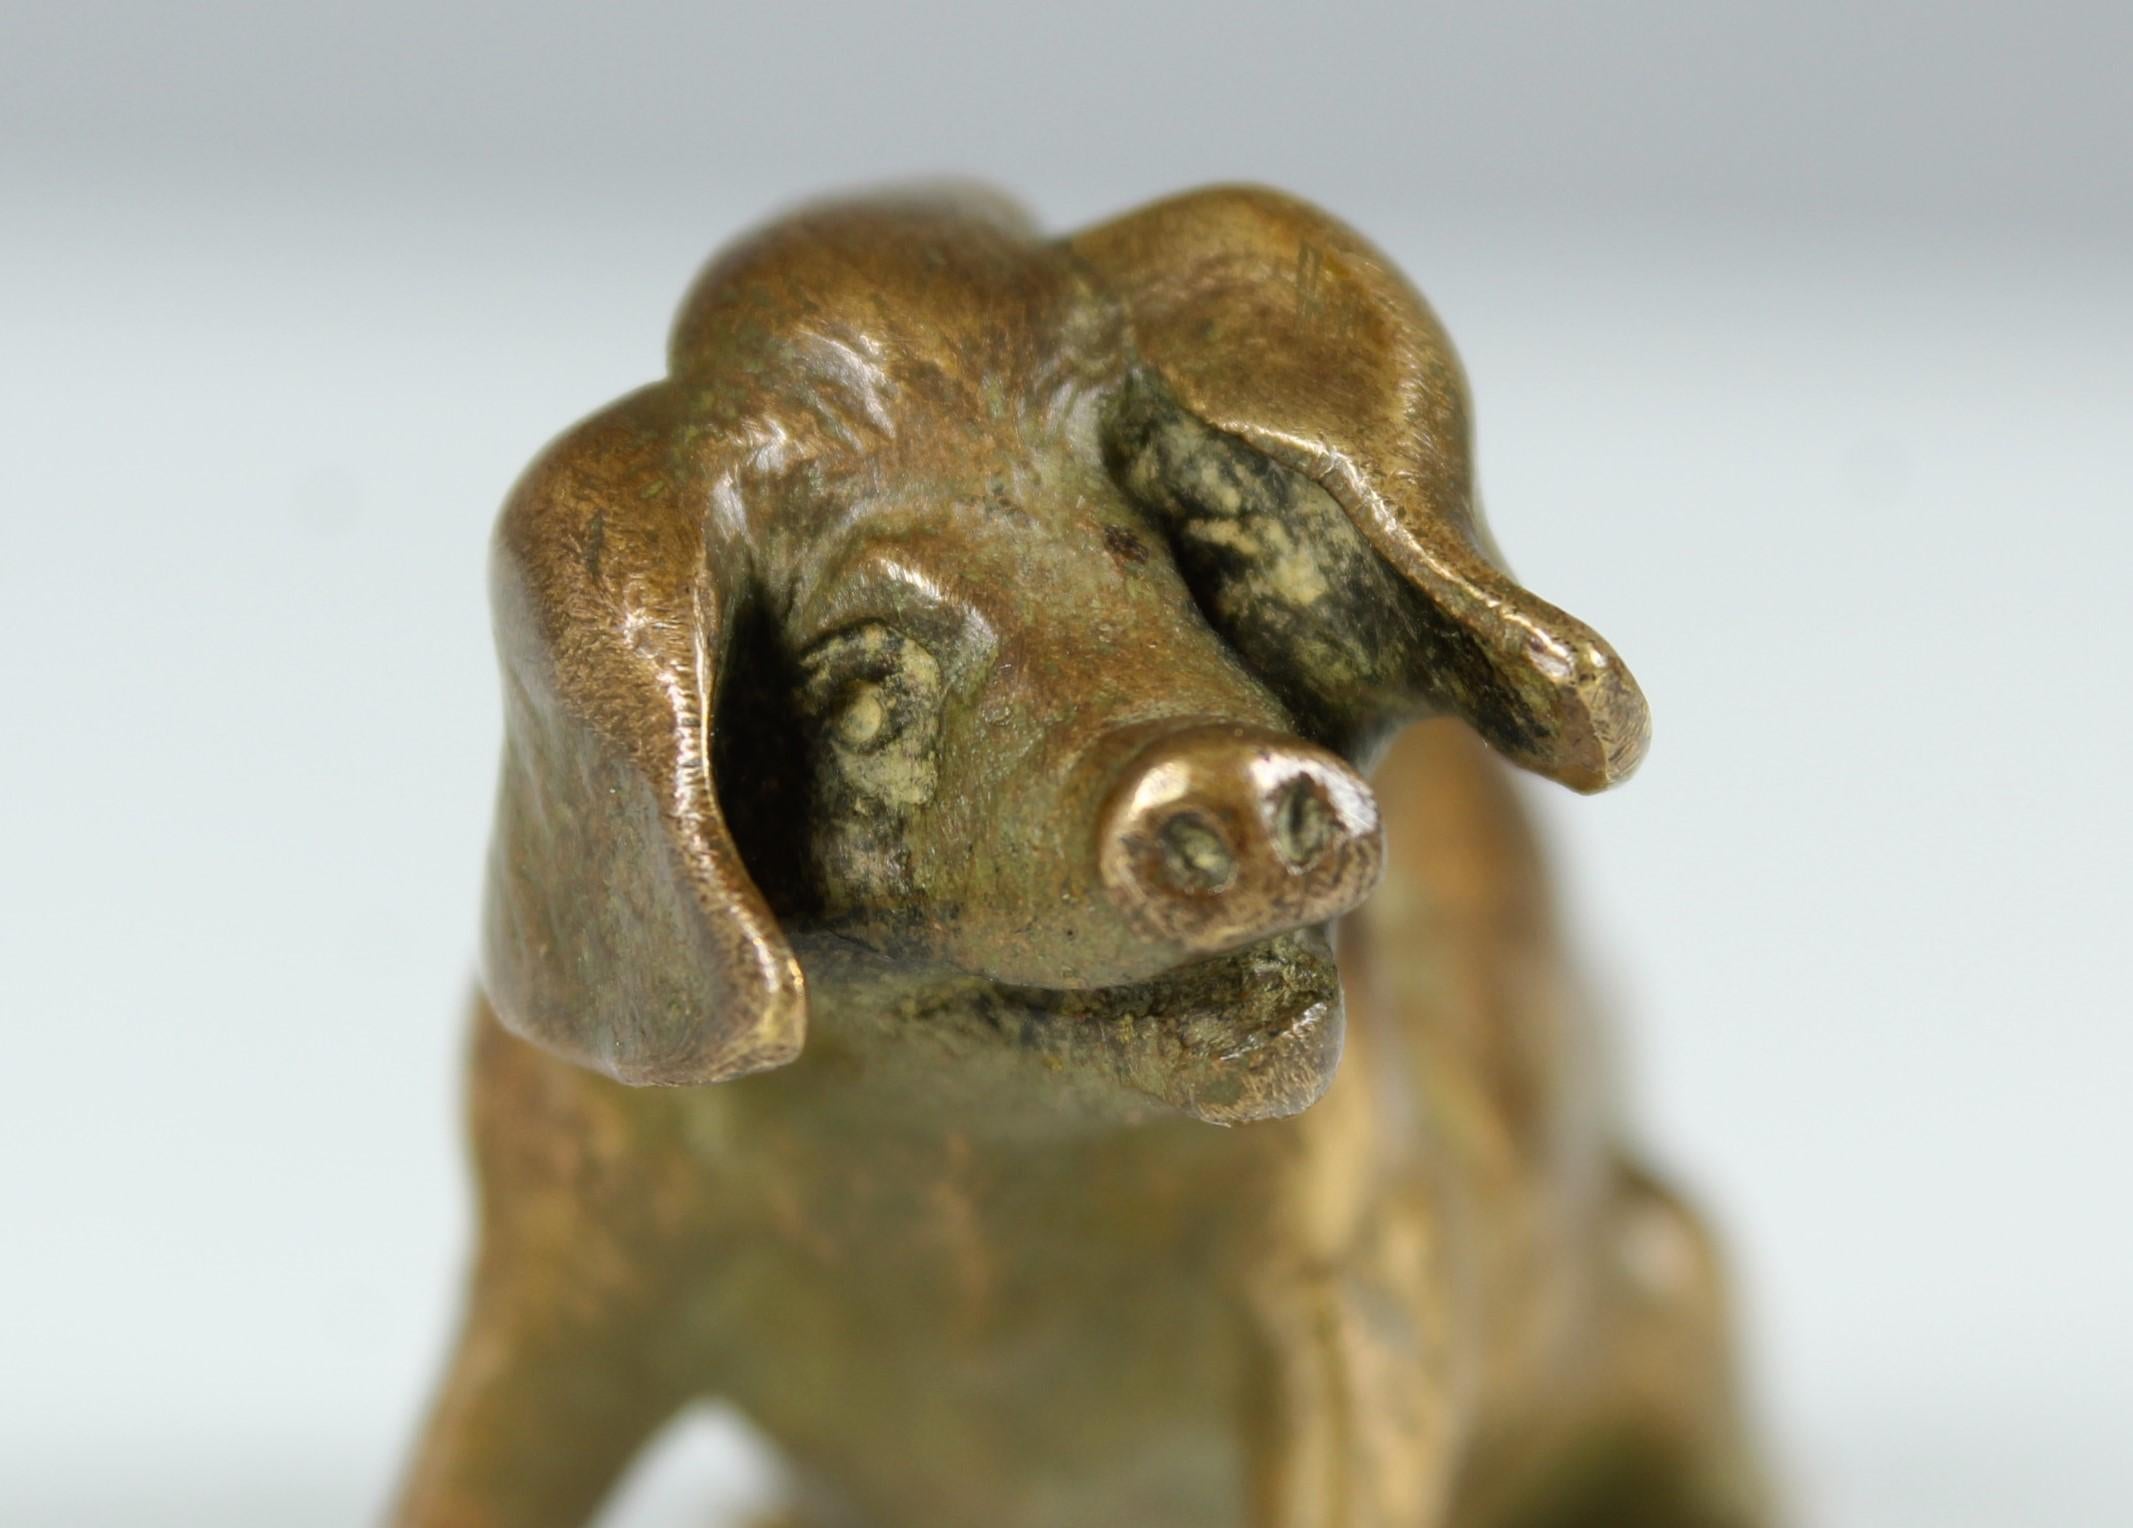 Antique bronze sculpture by Louis Albert Carvin (born 7th august 1875 in Paris - 6th January 1951). Depiction of a sitting pig. Finely chiseled. 
Signed at the bottom 